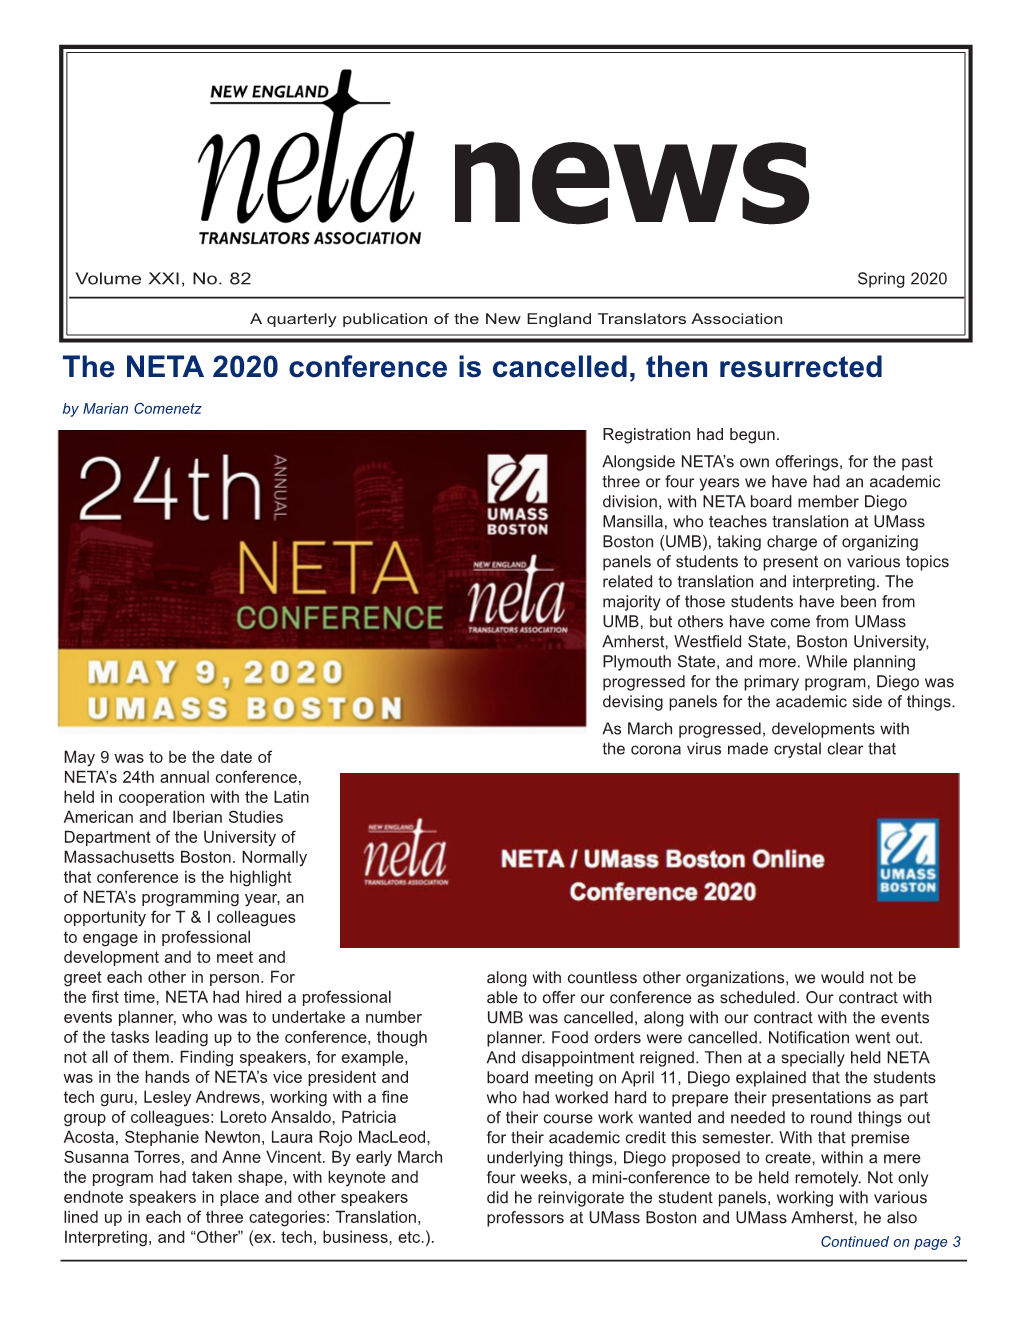 The NETA 2020 Conference Is Cancelled, Then Resurrected by Marian Comenetz Registration Had Begun